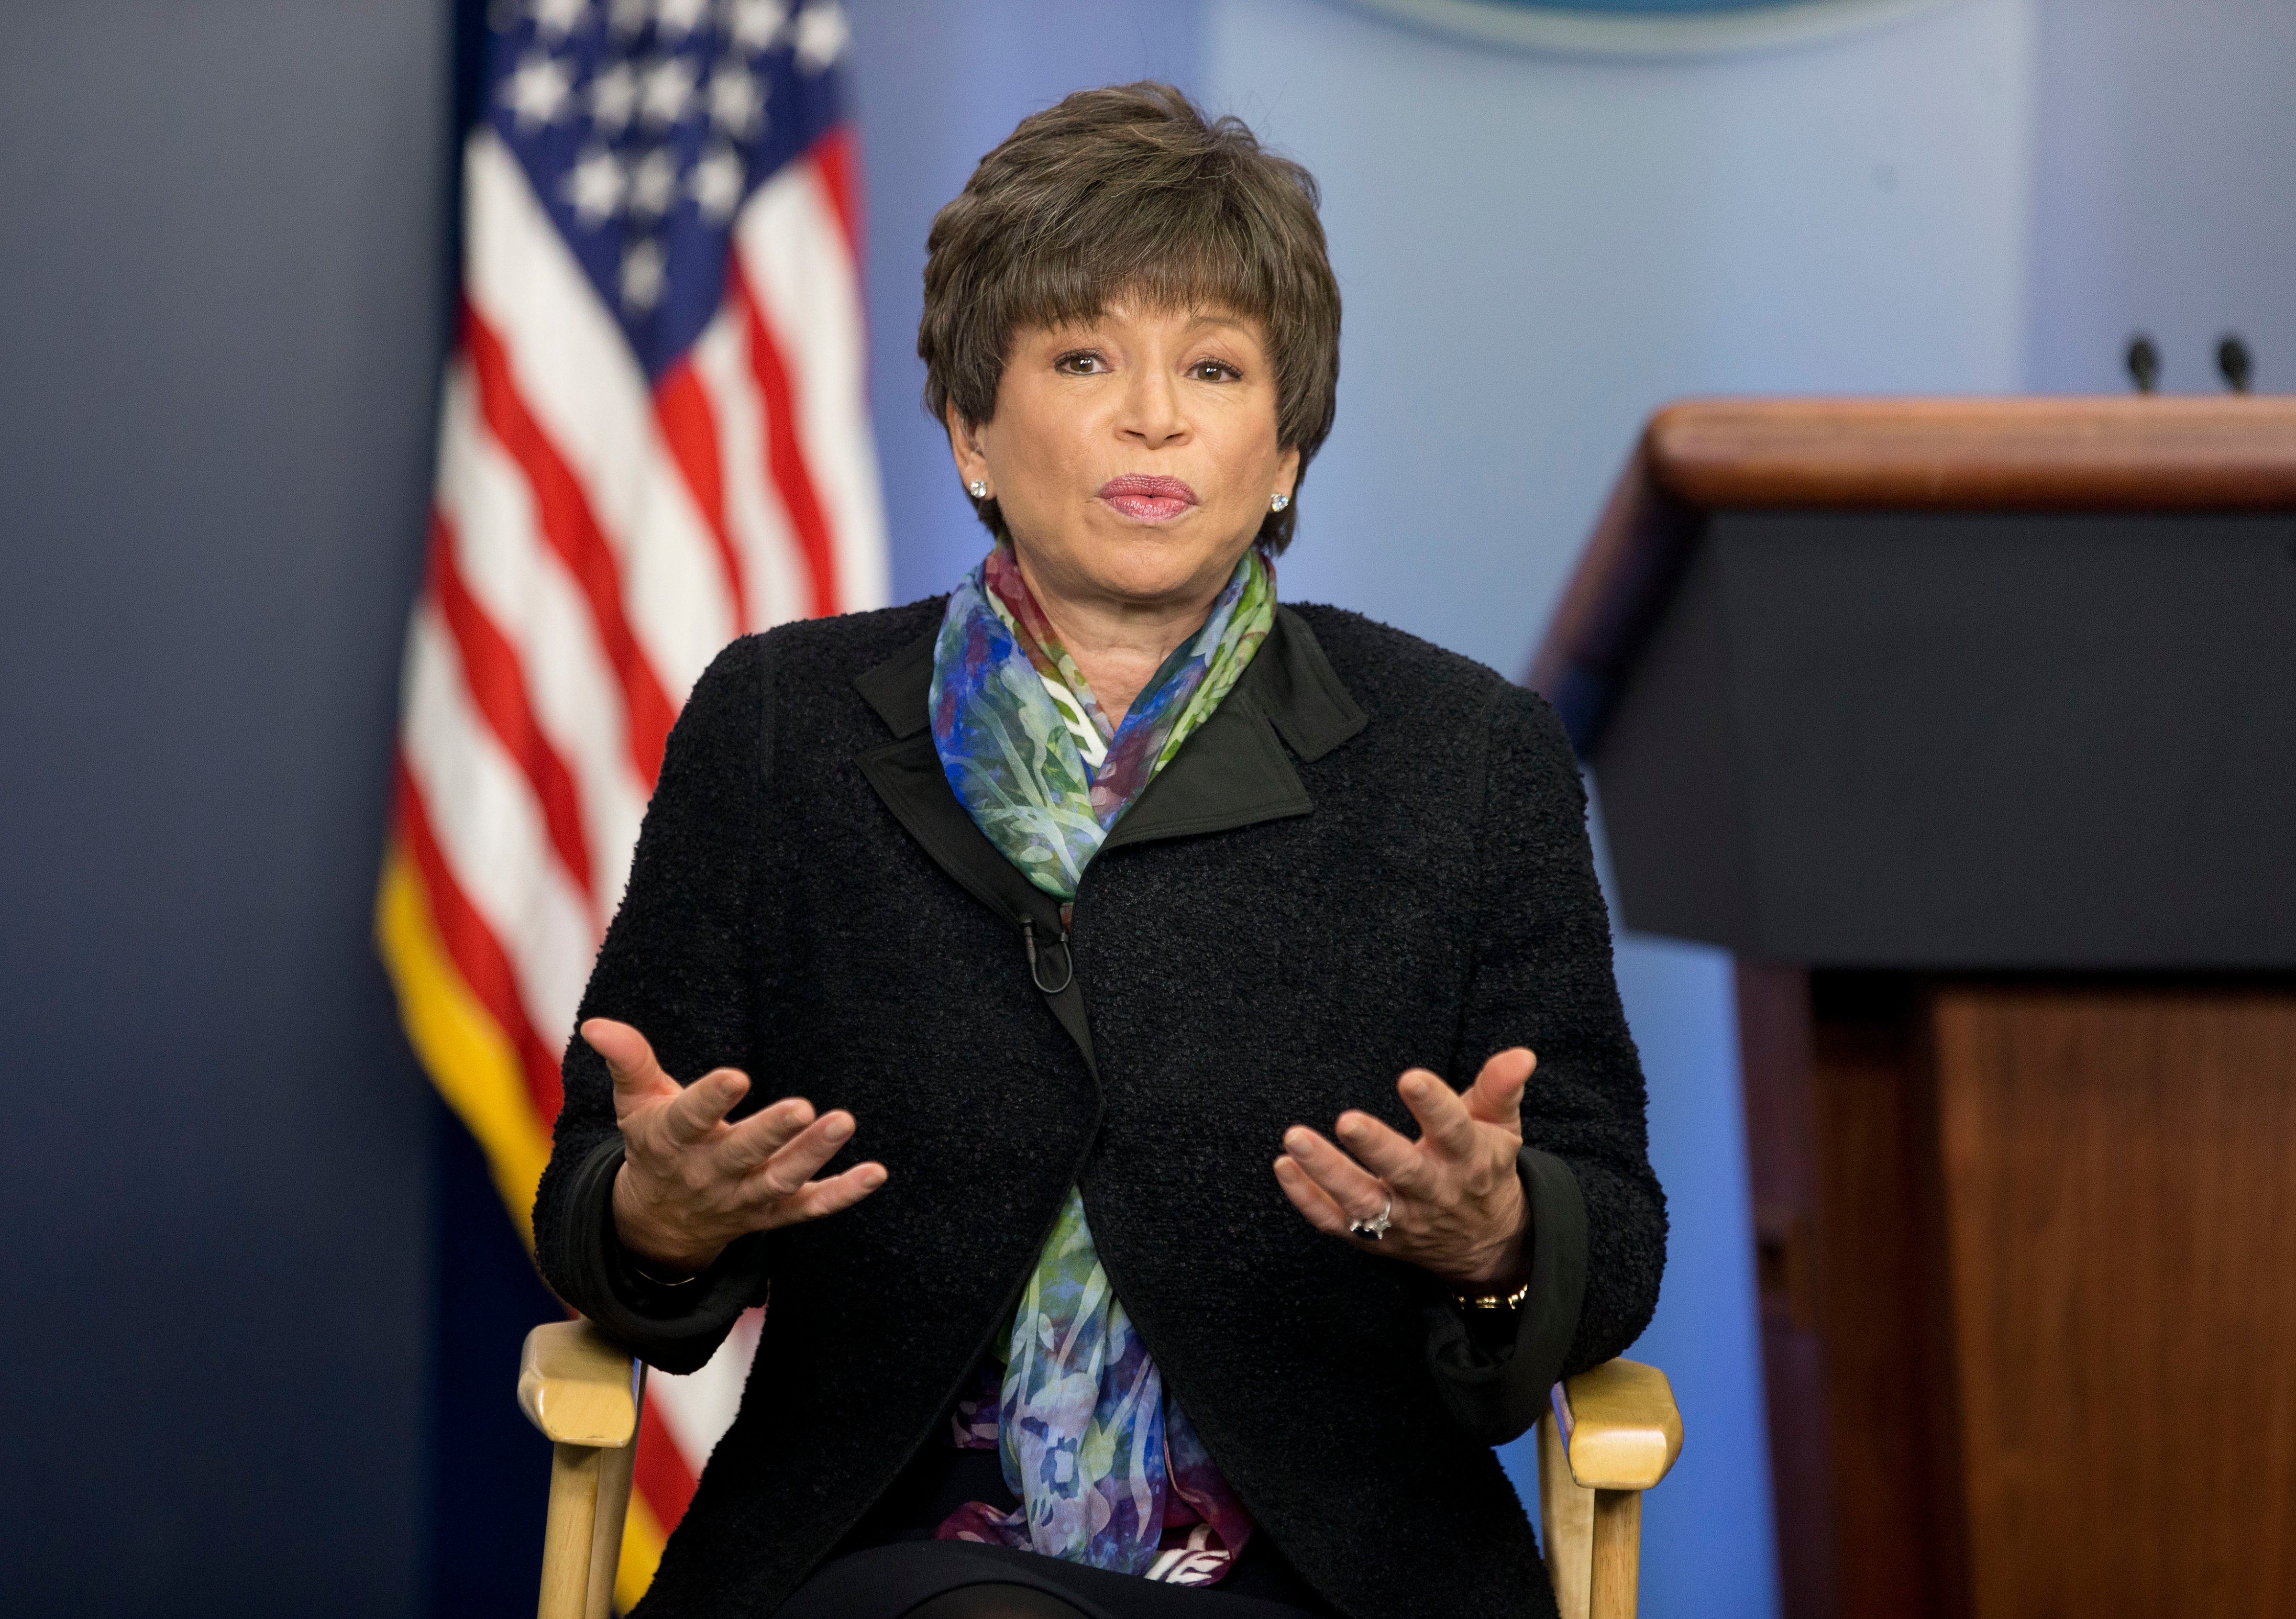 Senior White House adviser Valerie Jarrett speaks during a morning television interview with CBS in the Brady Press Briefing room of the White House in Washington, Wednesday, March 12, 2014. (AP Photo/Pablo Martinez Monsivais) (Pablo Martinez Monsivais/ASSOCIATED PRESS)